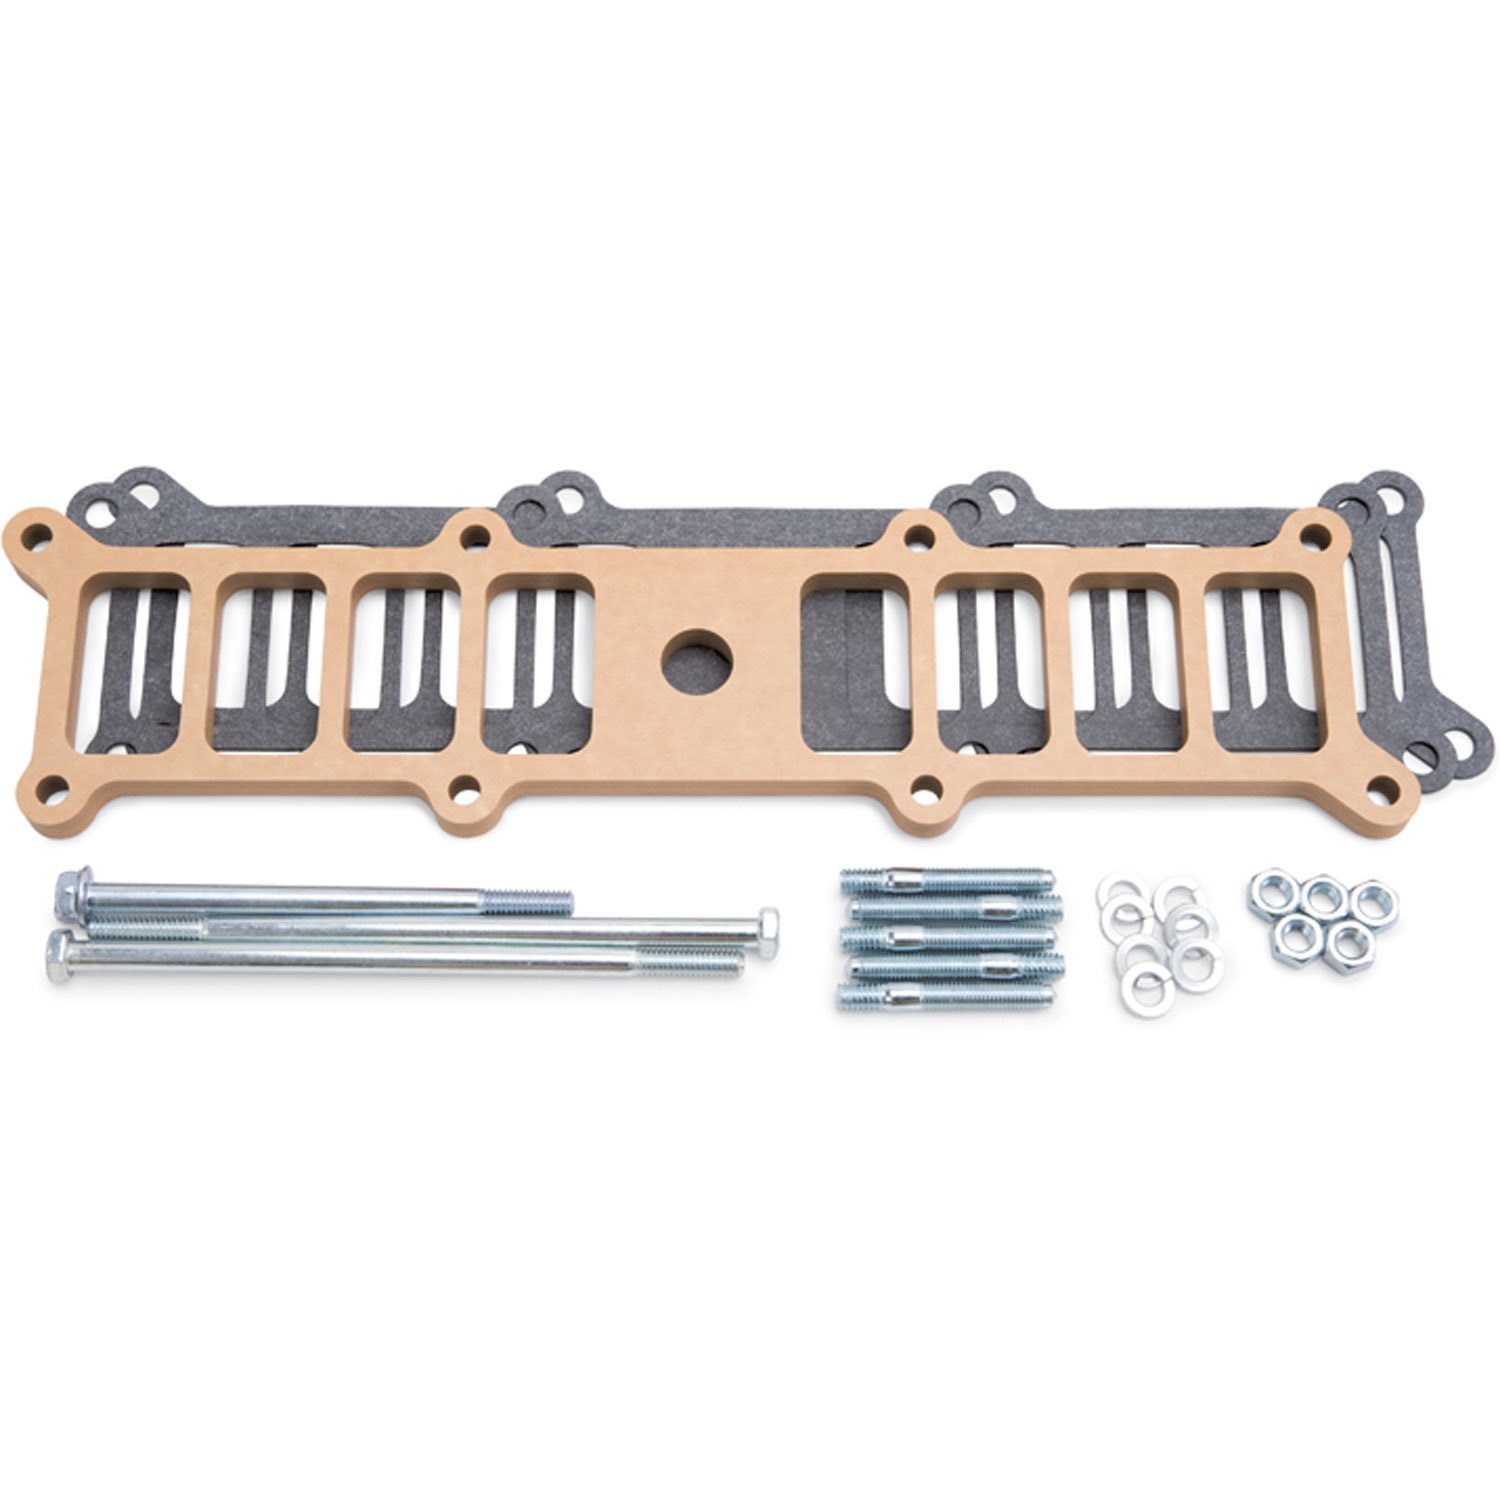 Intake Manifold Spacer Kit For Small Block Ford